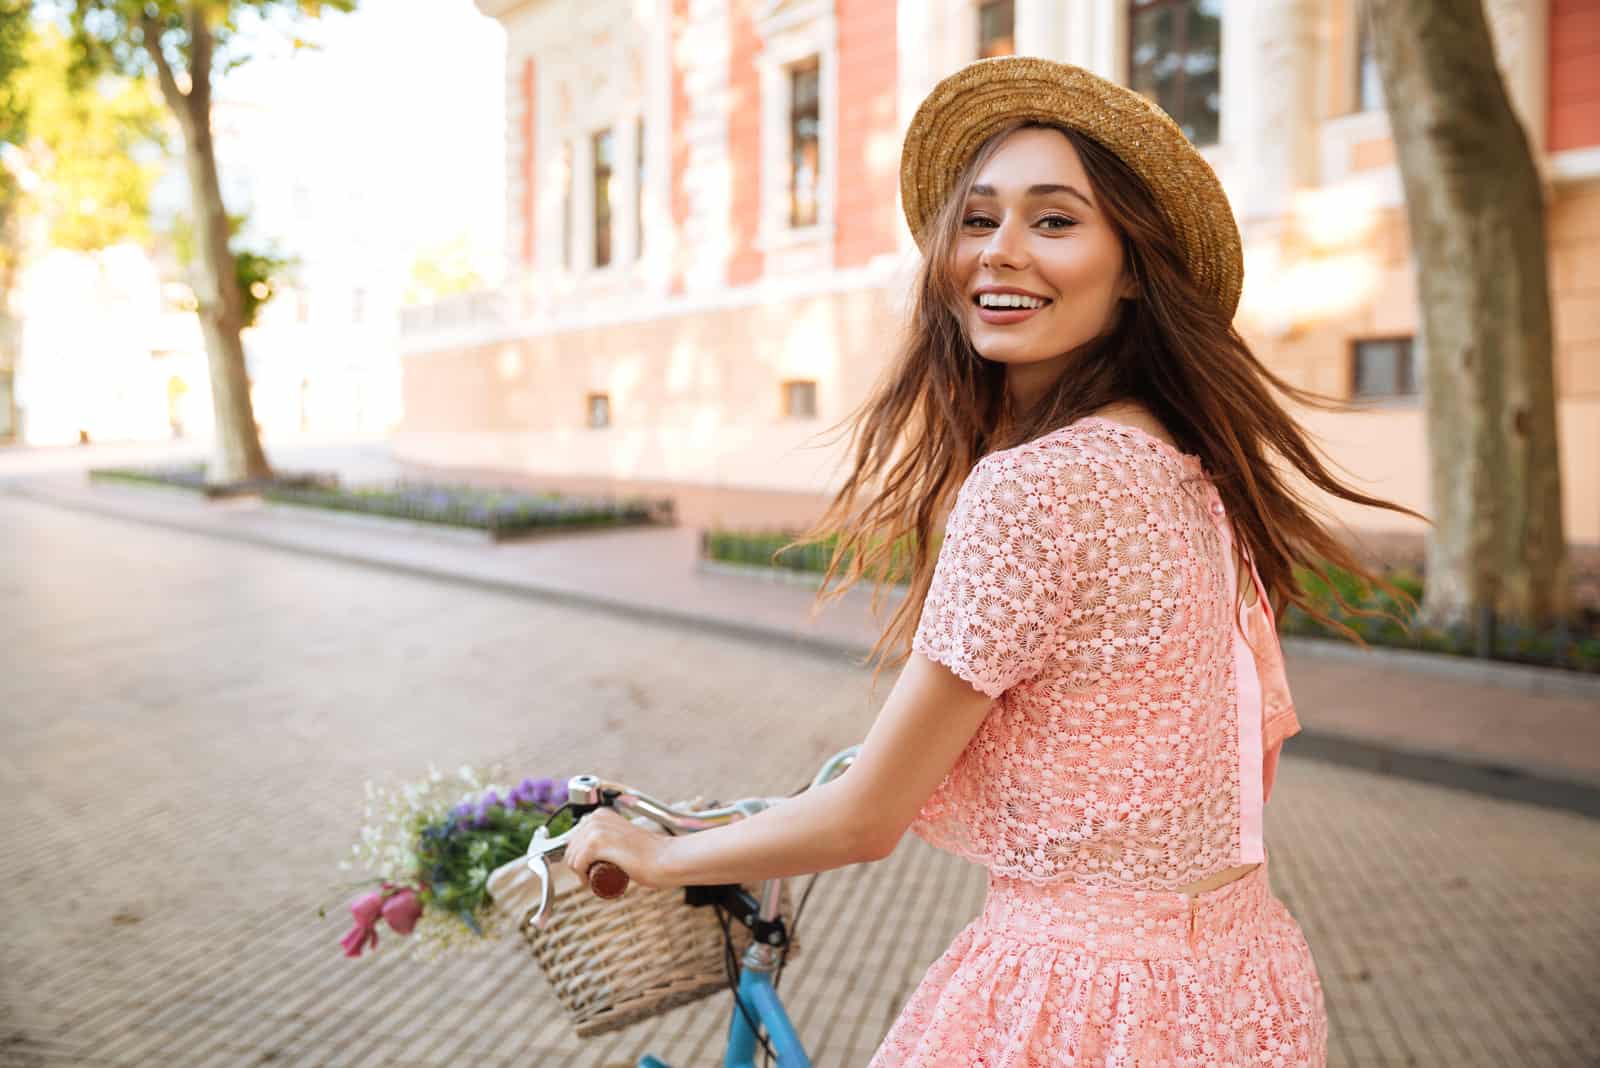 a smiling woman with a hat on her head rides a bicycle